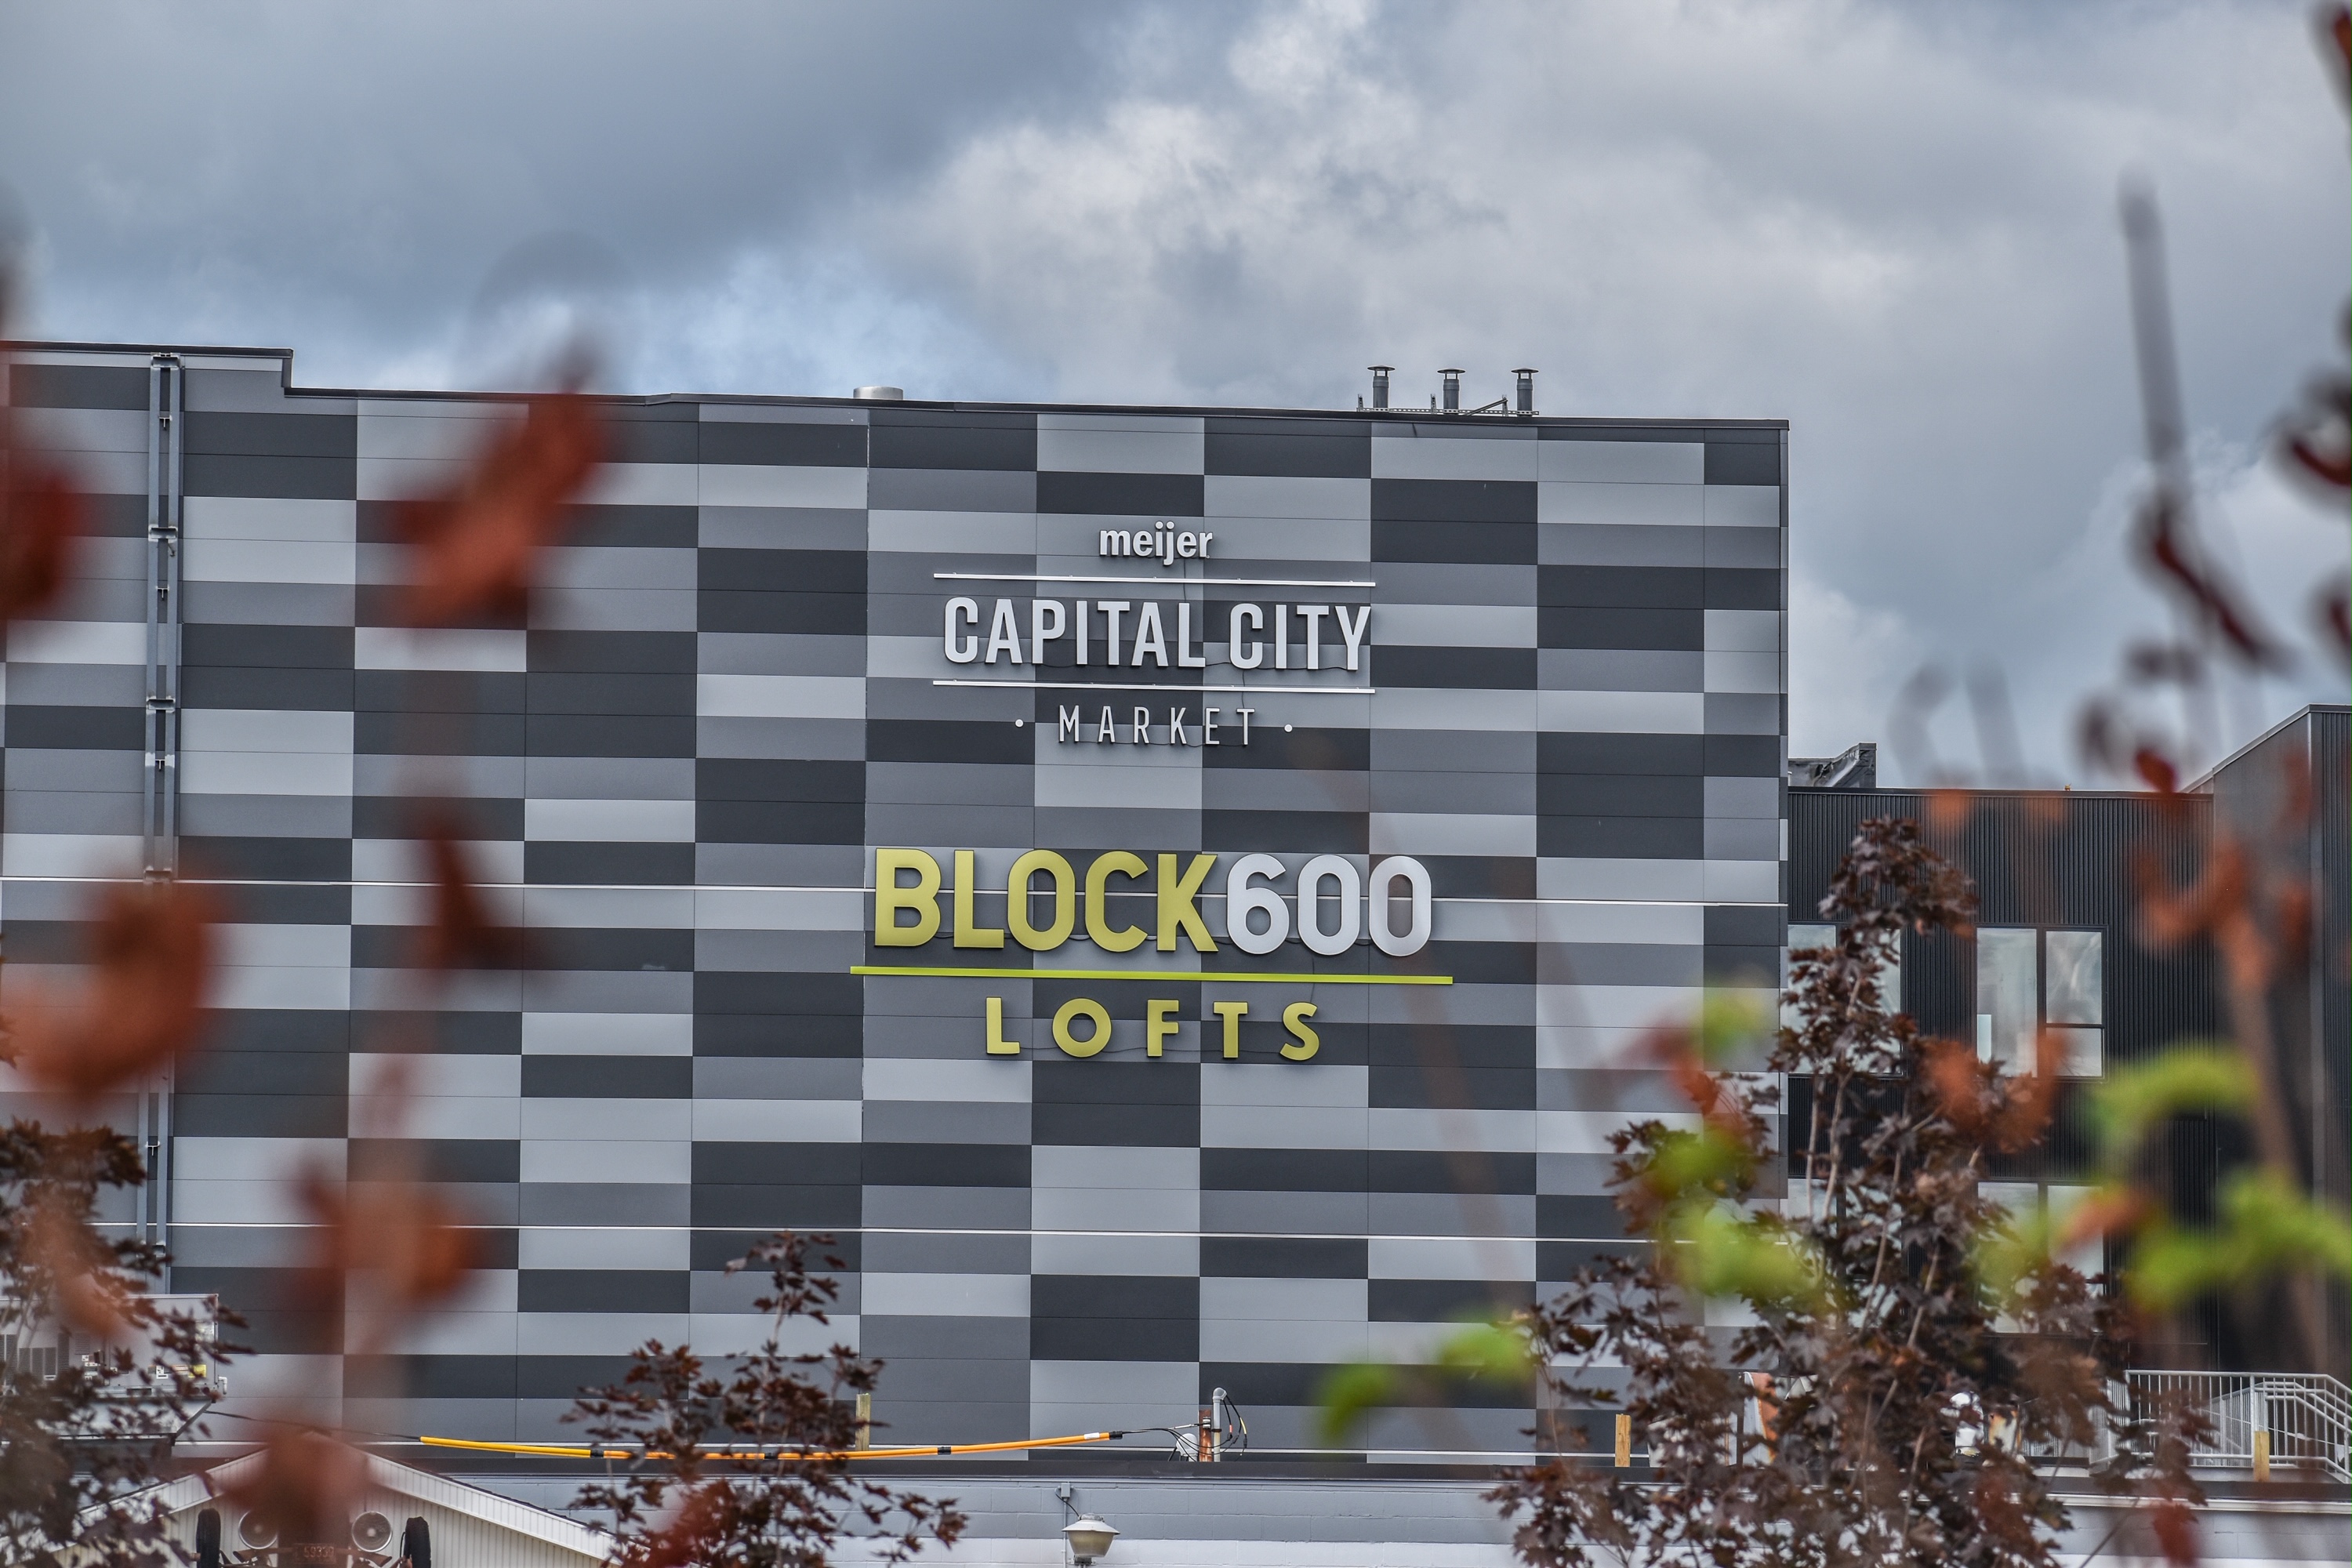 BLOCK600 Lofts and Capital City Market sign on the south end of BLOCK600